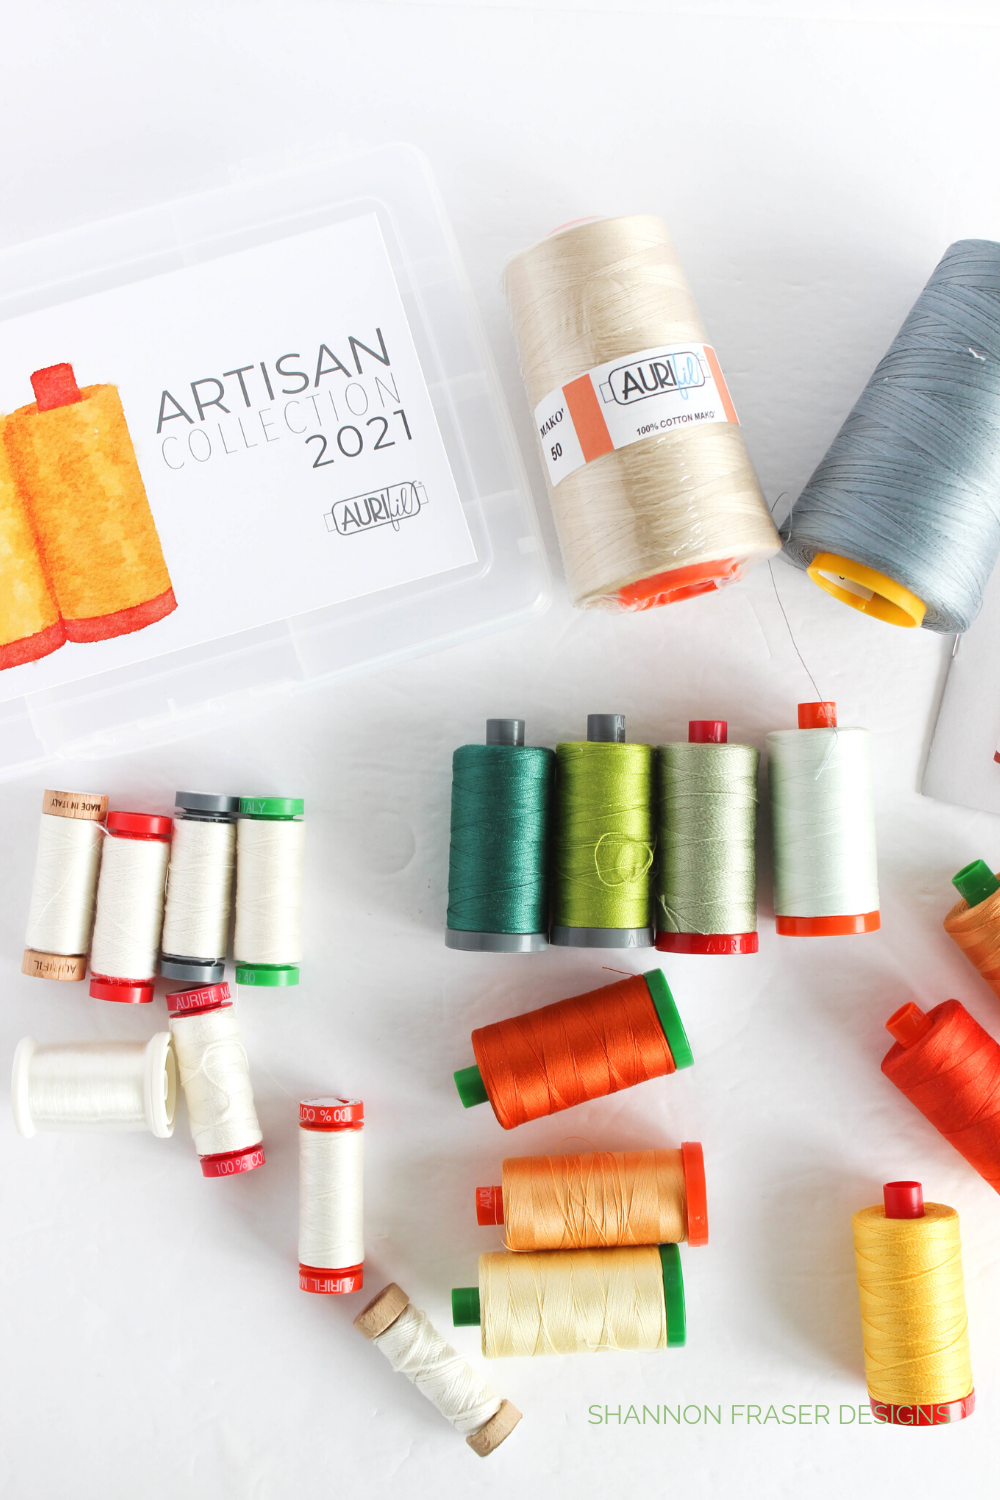 Different sizes of Aurifil Thread spools included in the Aurifil Artisan Collection 2021 | Shannon Fraser Designs #sewingnotions